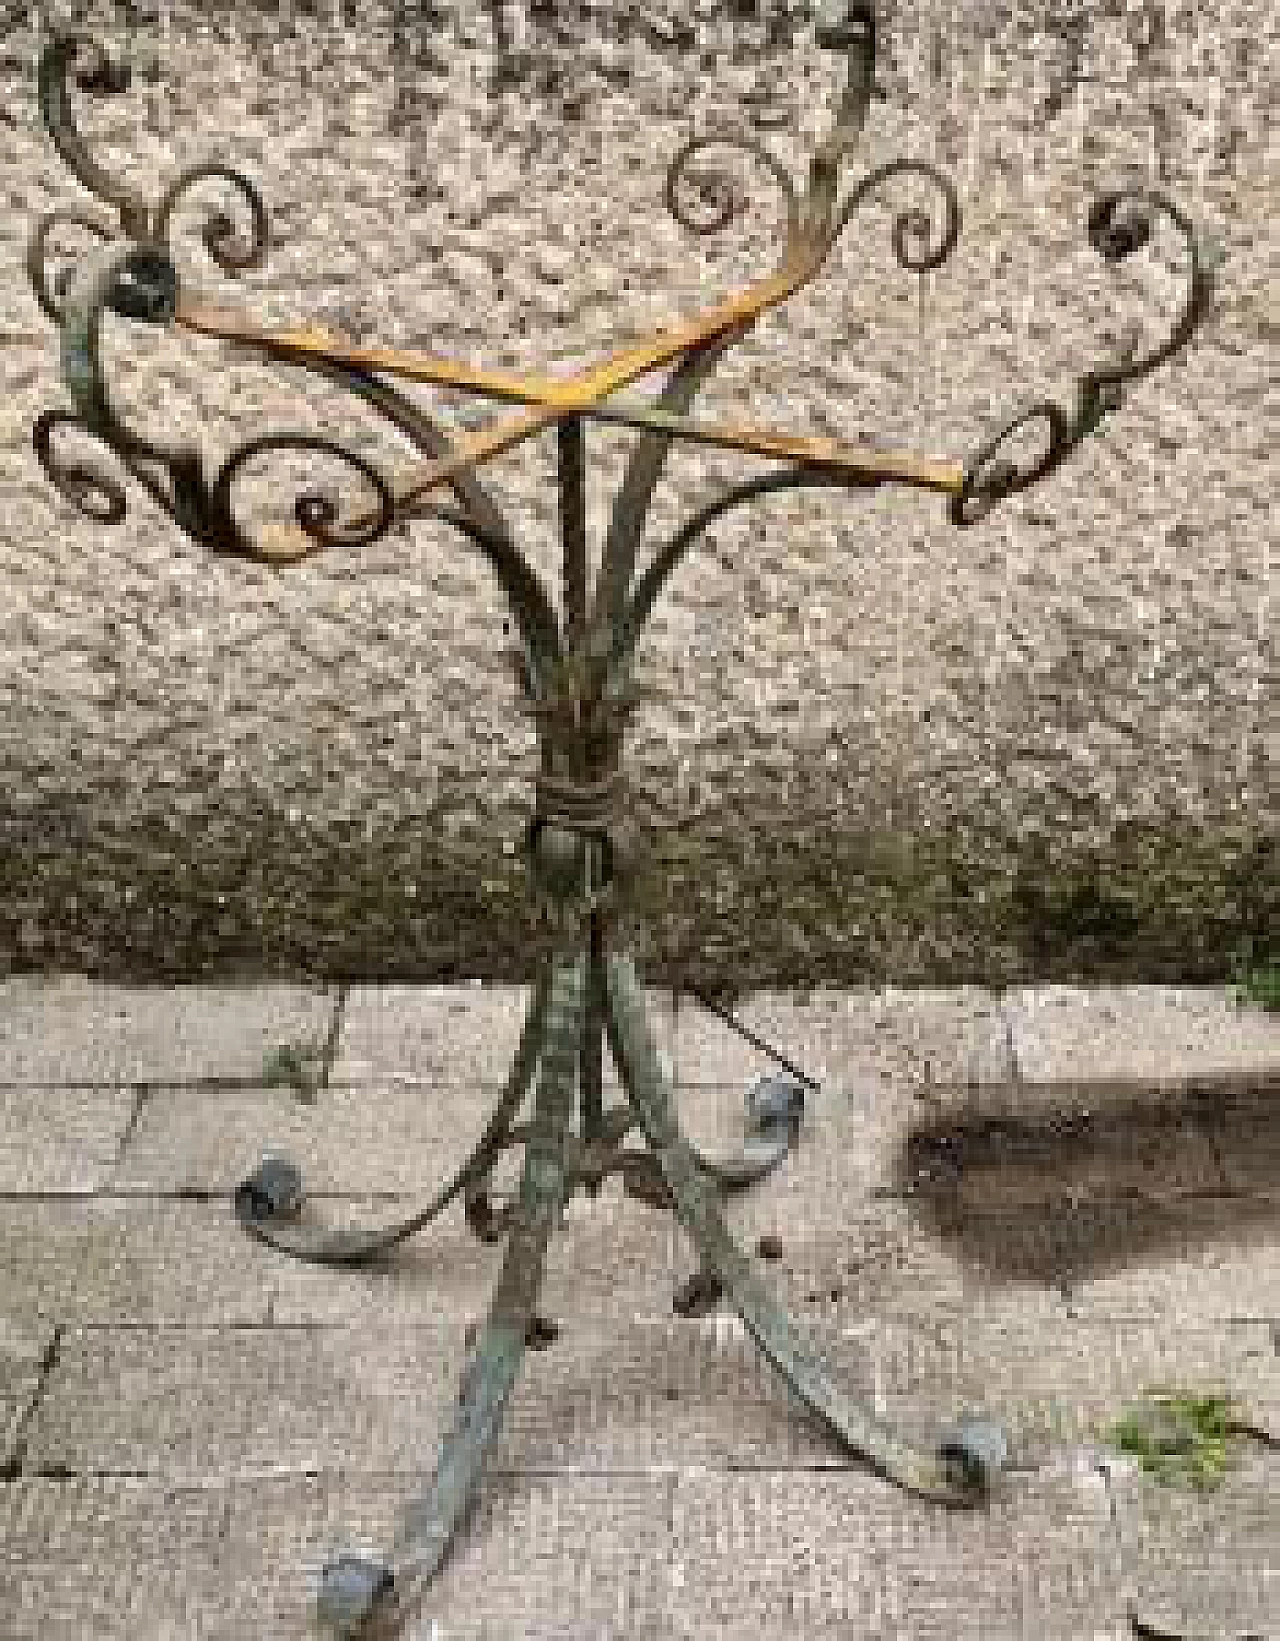 Planter in wrought iron 1192174